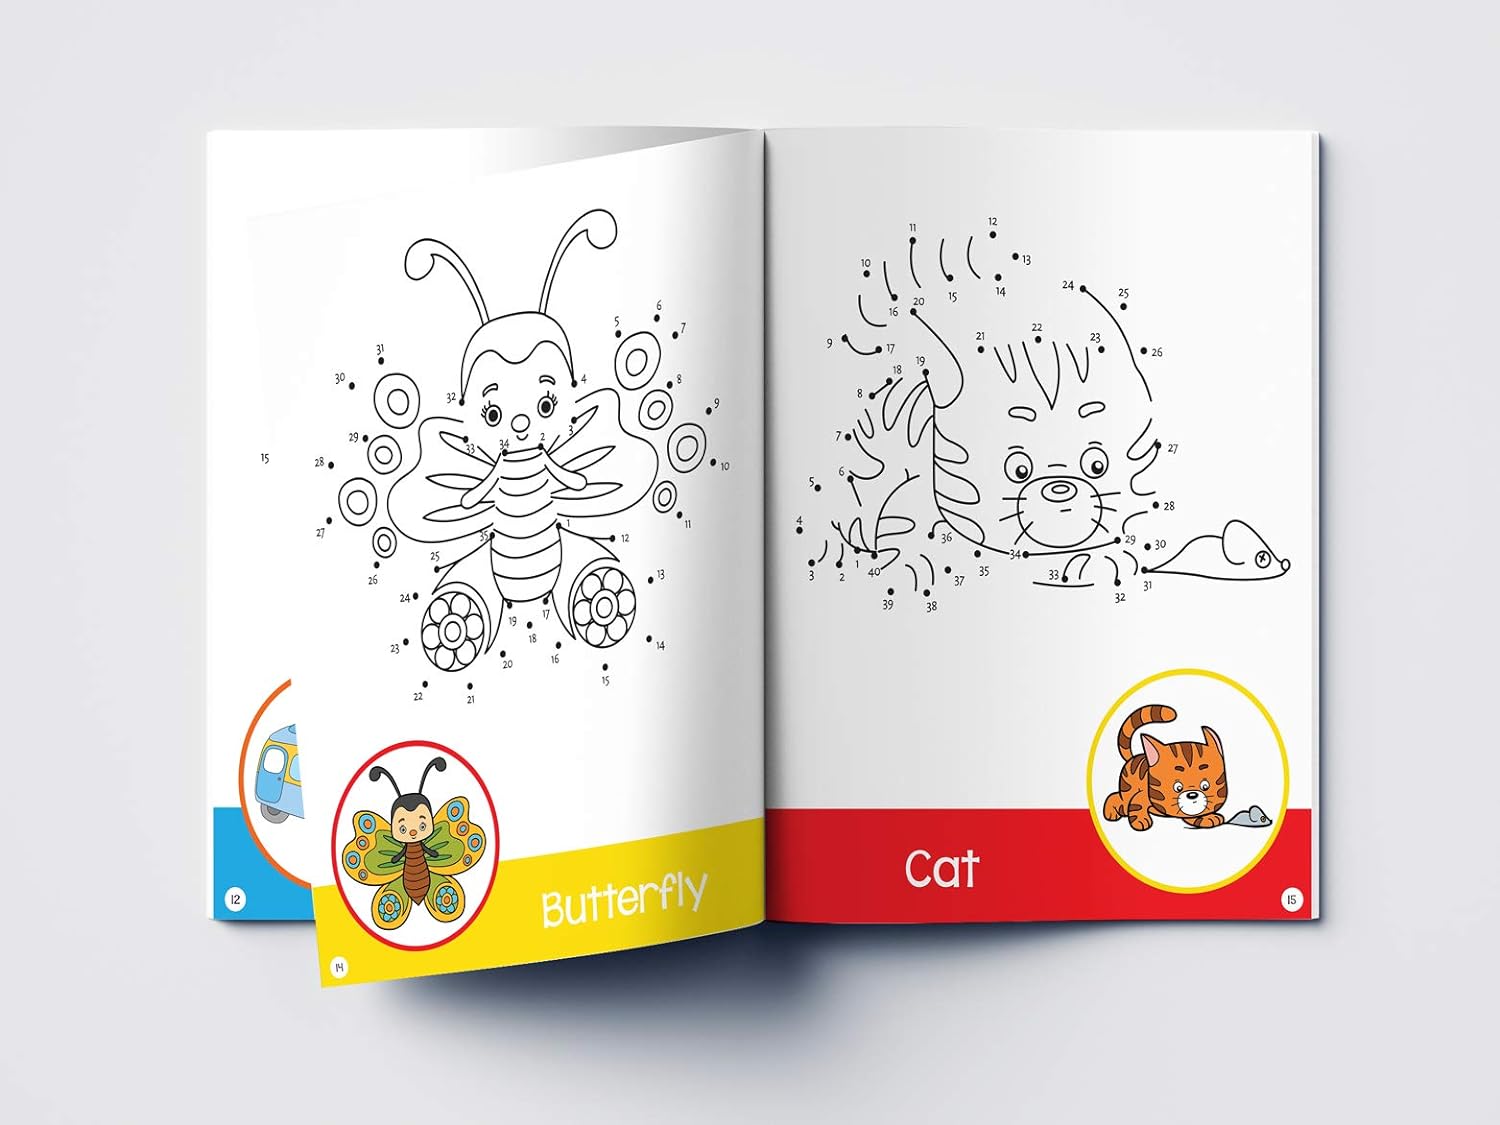 Dot To Dot : First Fun Activity Books For Kids